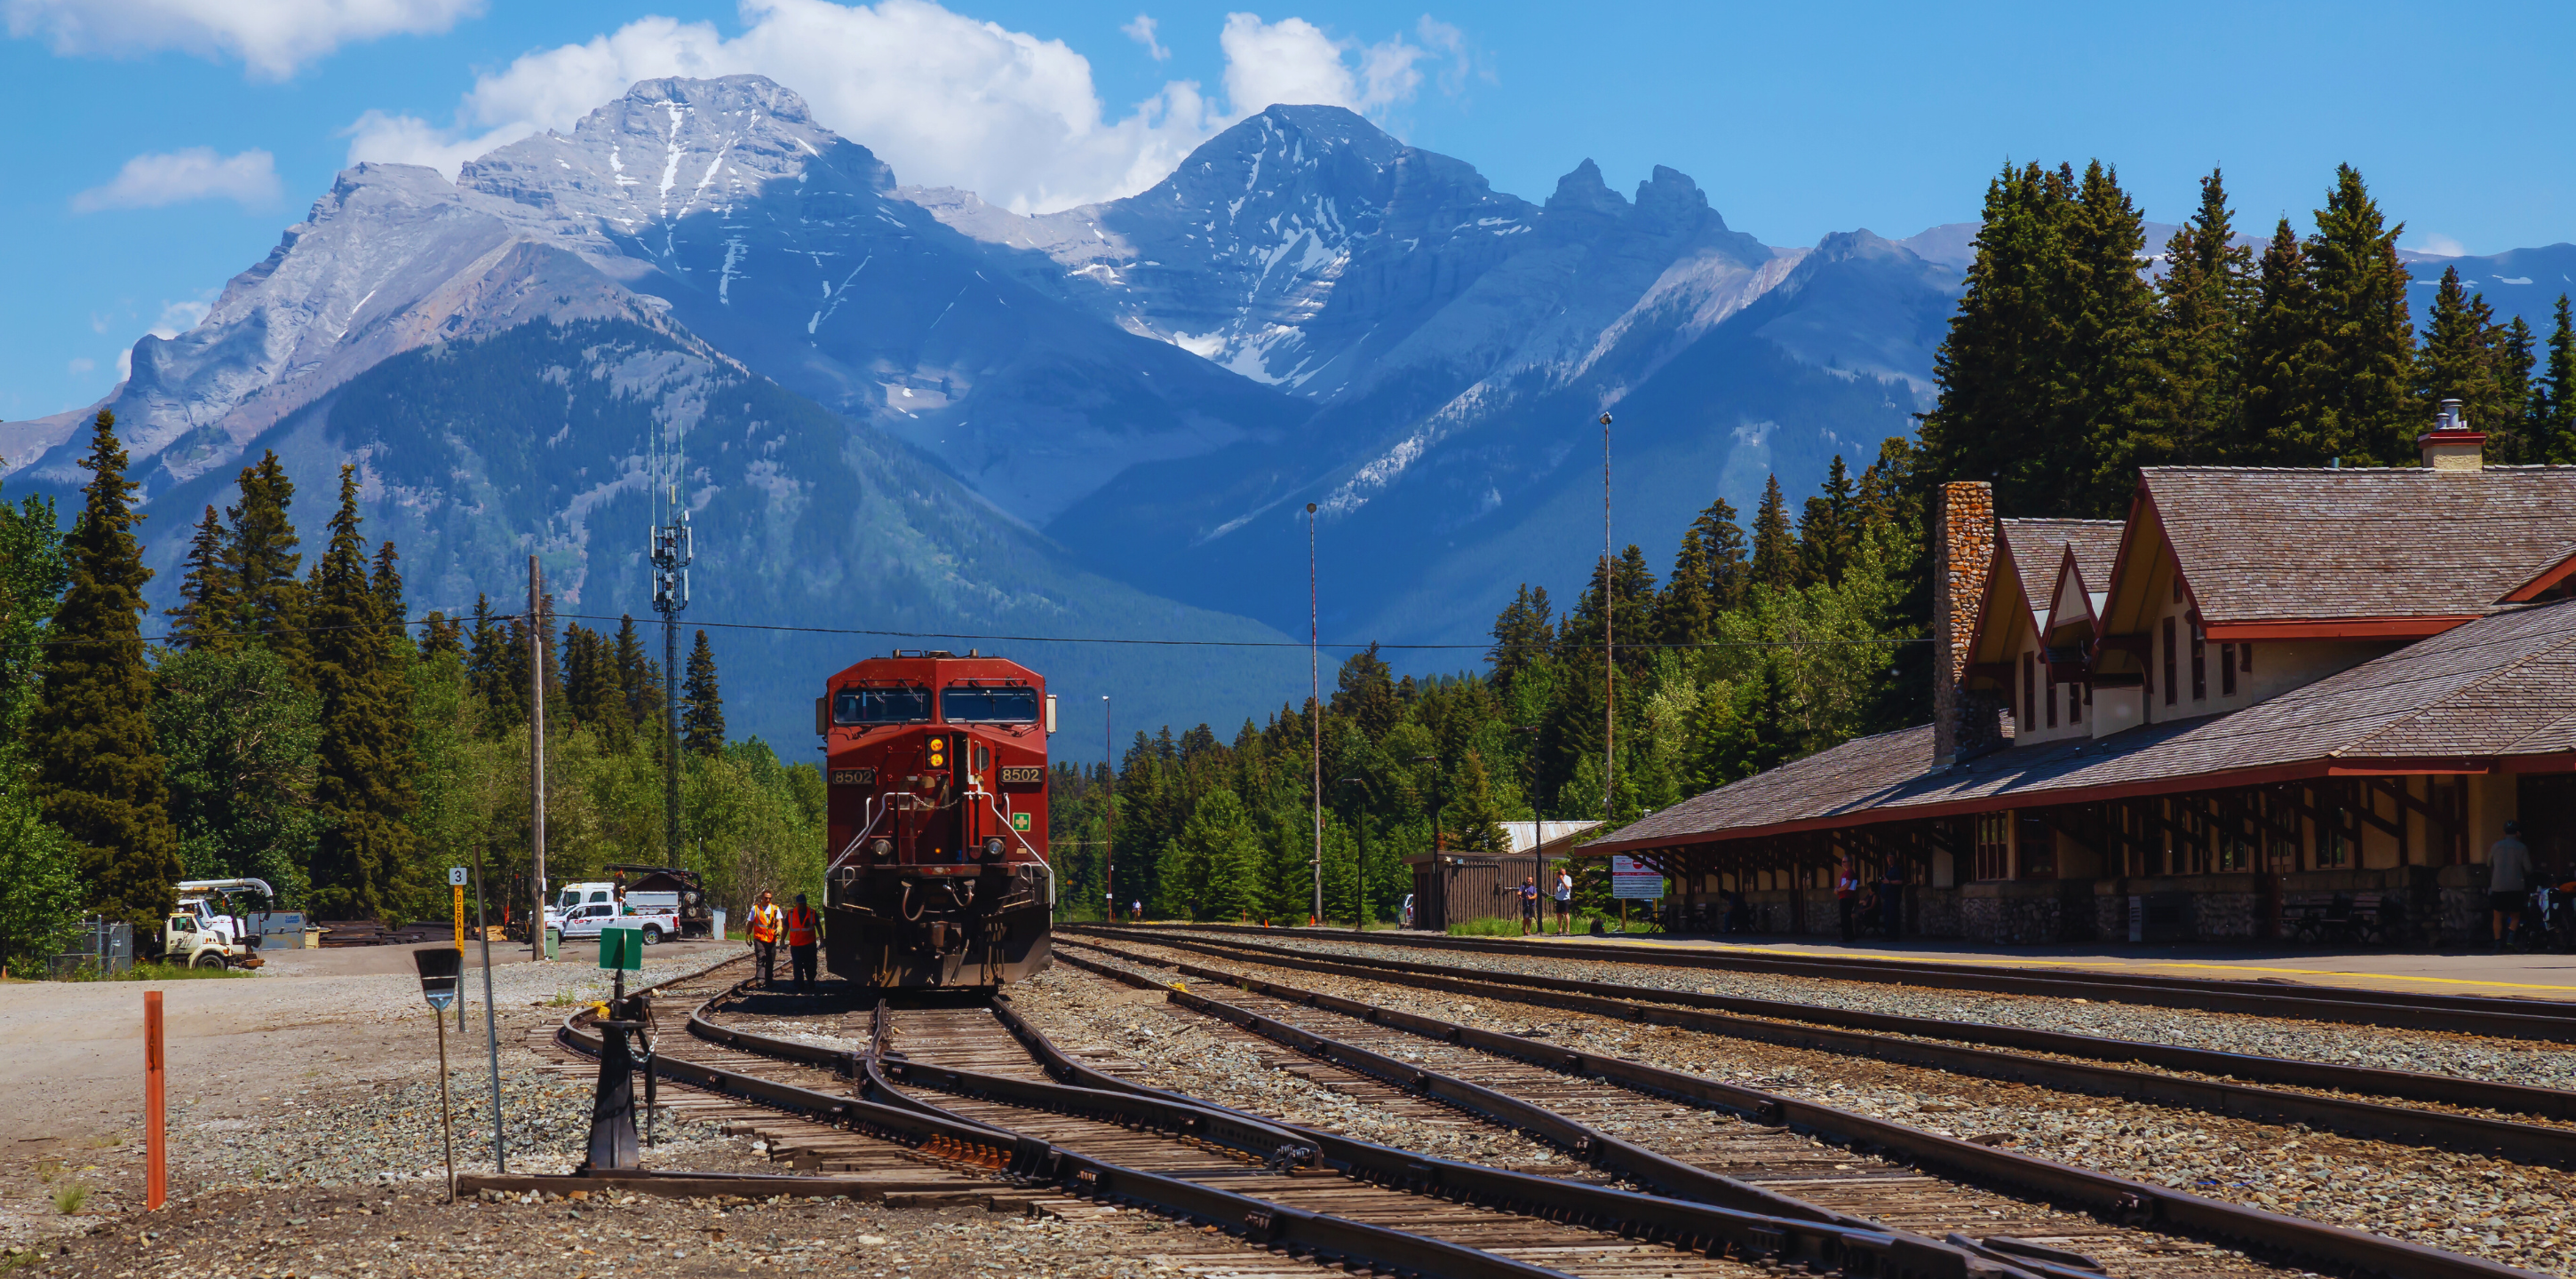 Featured image for “Banff Railway Lands Area Redevelopment Plan Goes to Public Hearing”